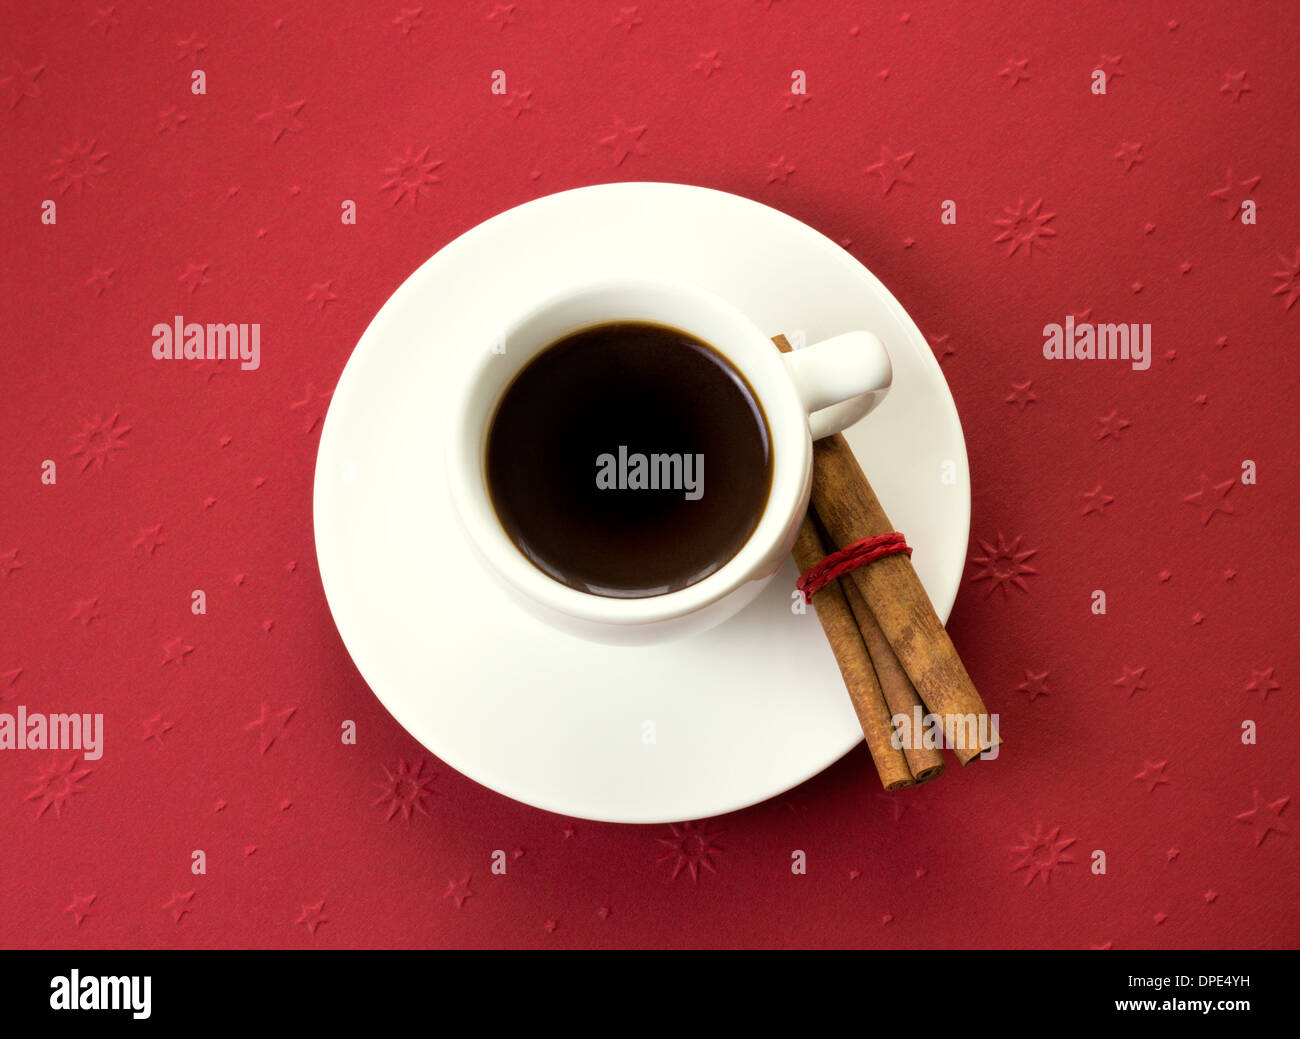 coffee white cup on red background can use like holiday food design Stock Photo